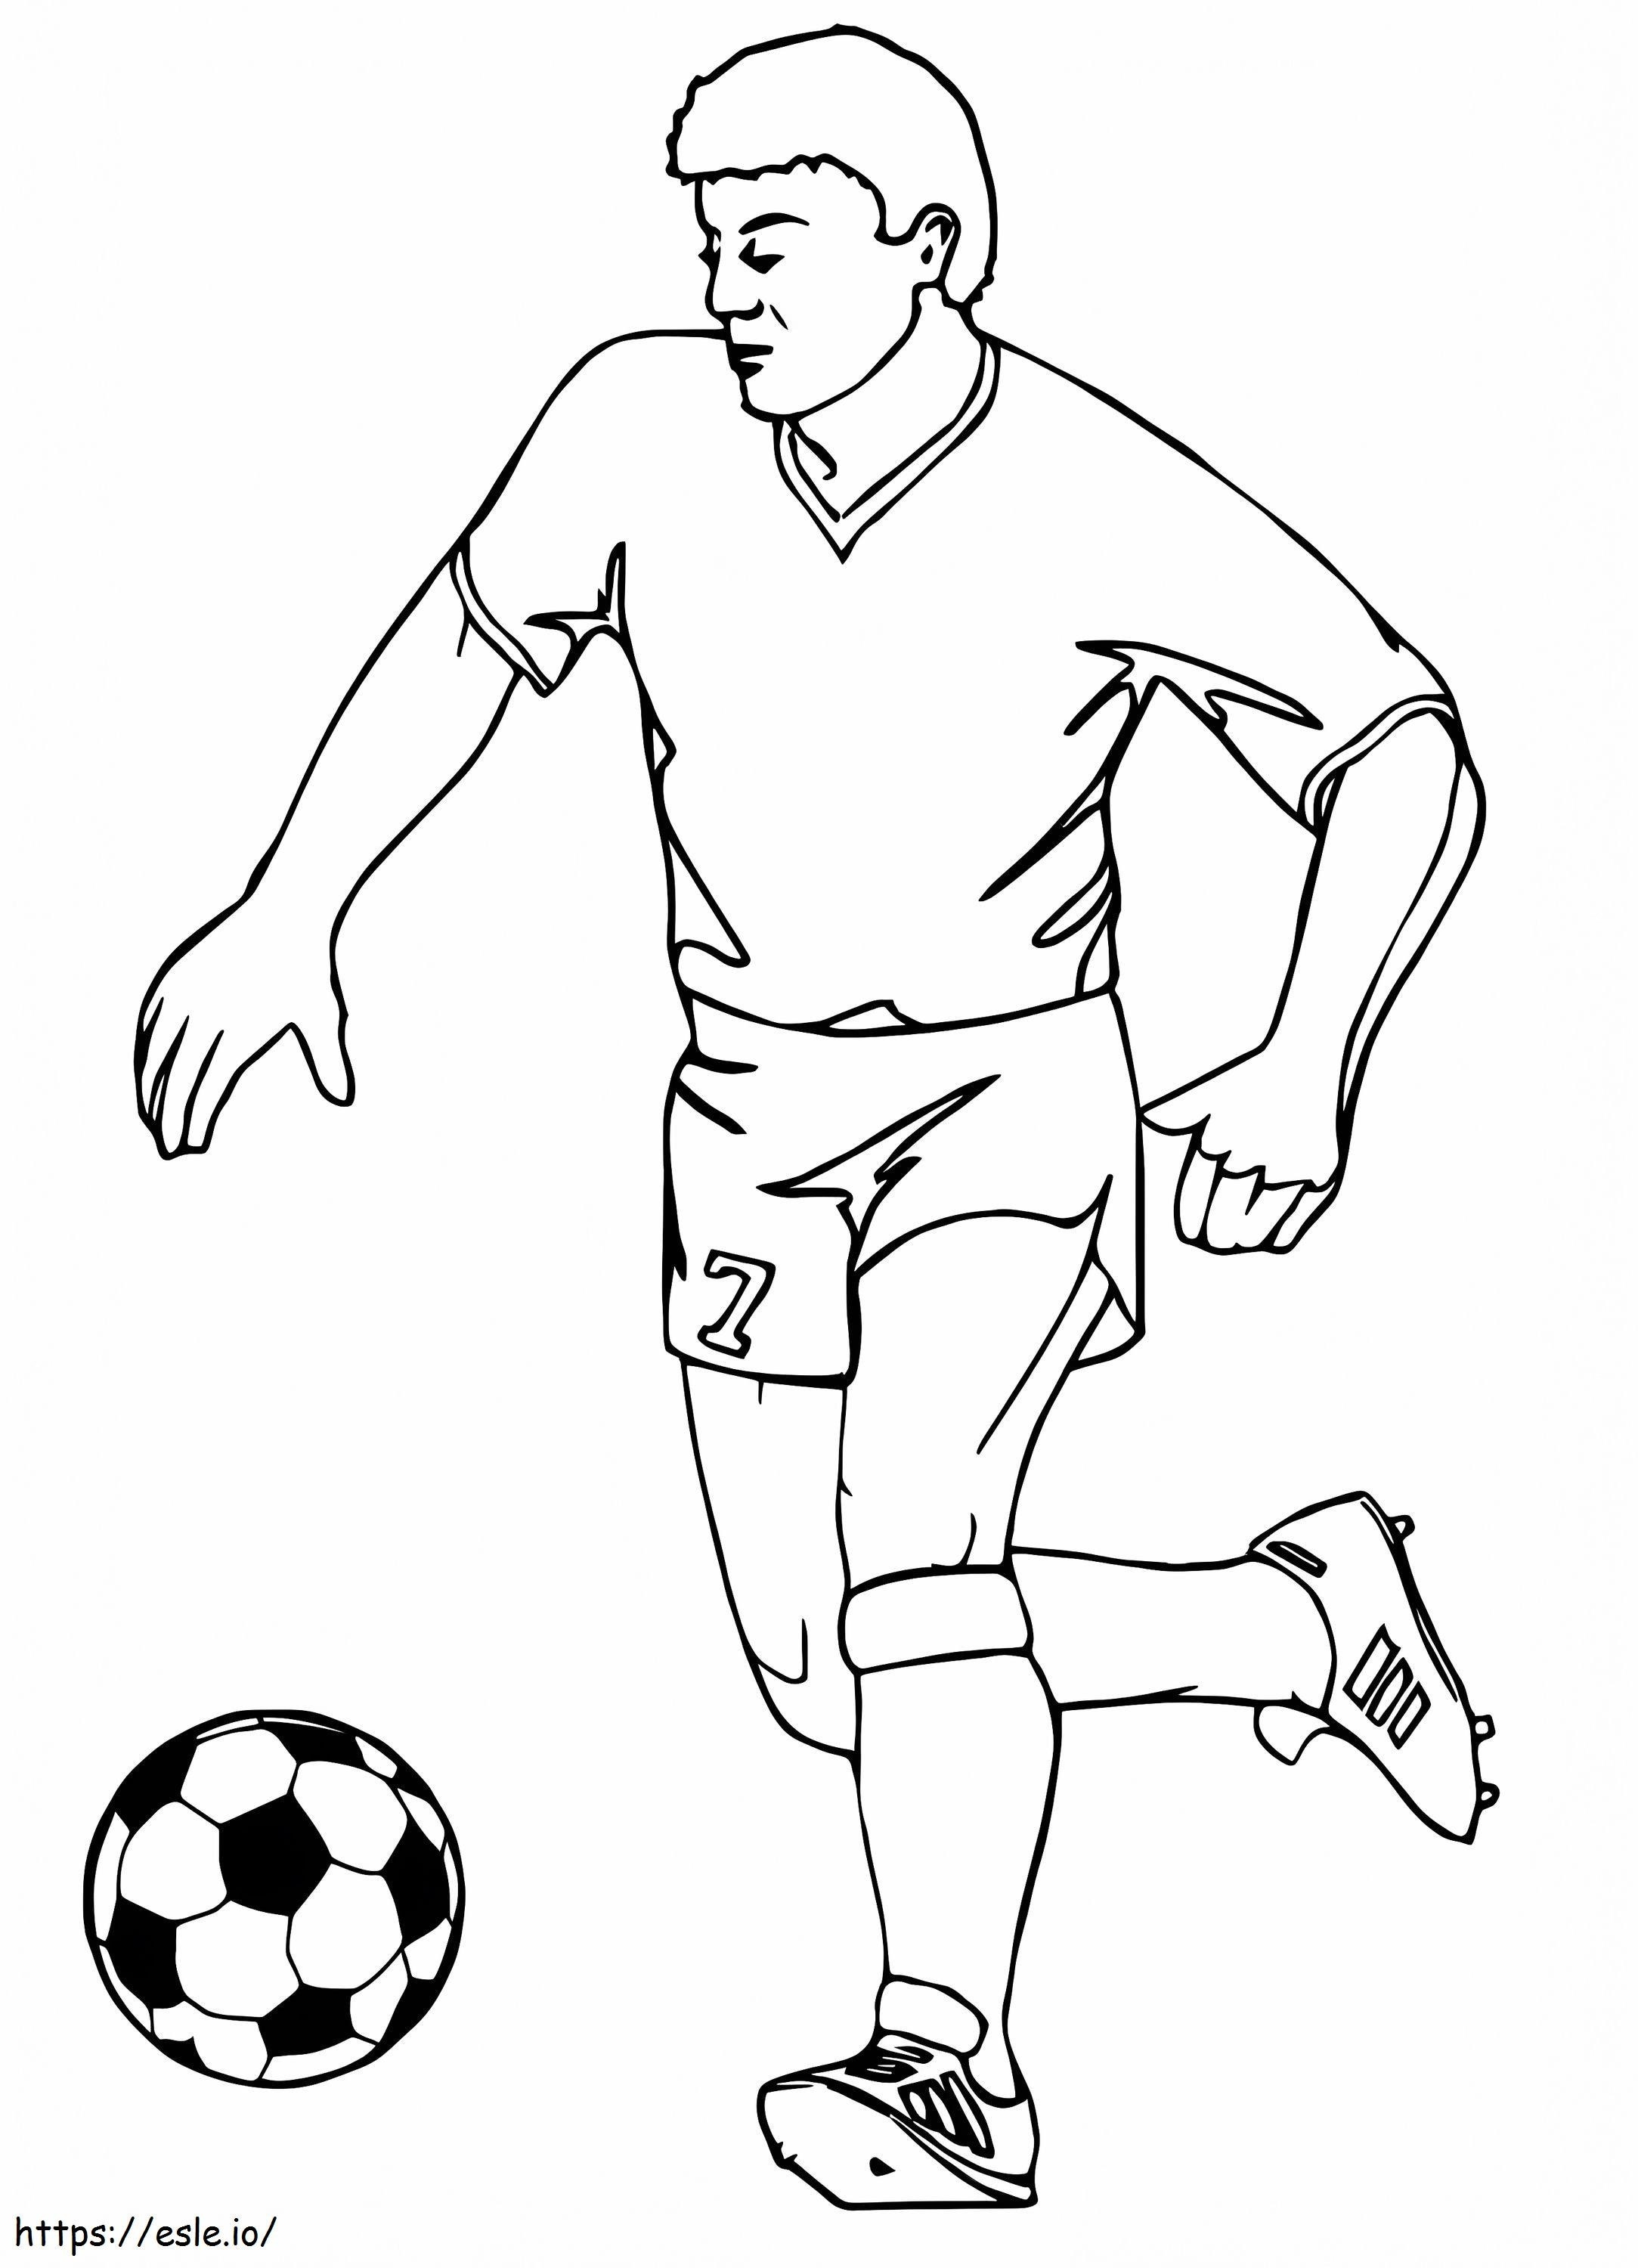 Awesome Soccer coloring page